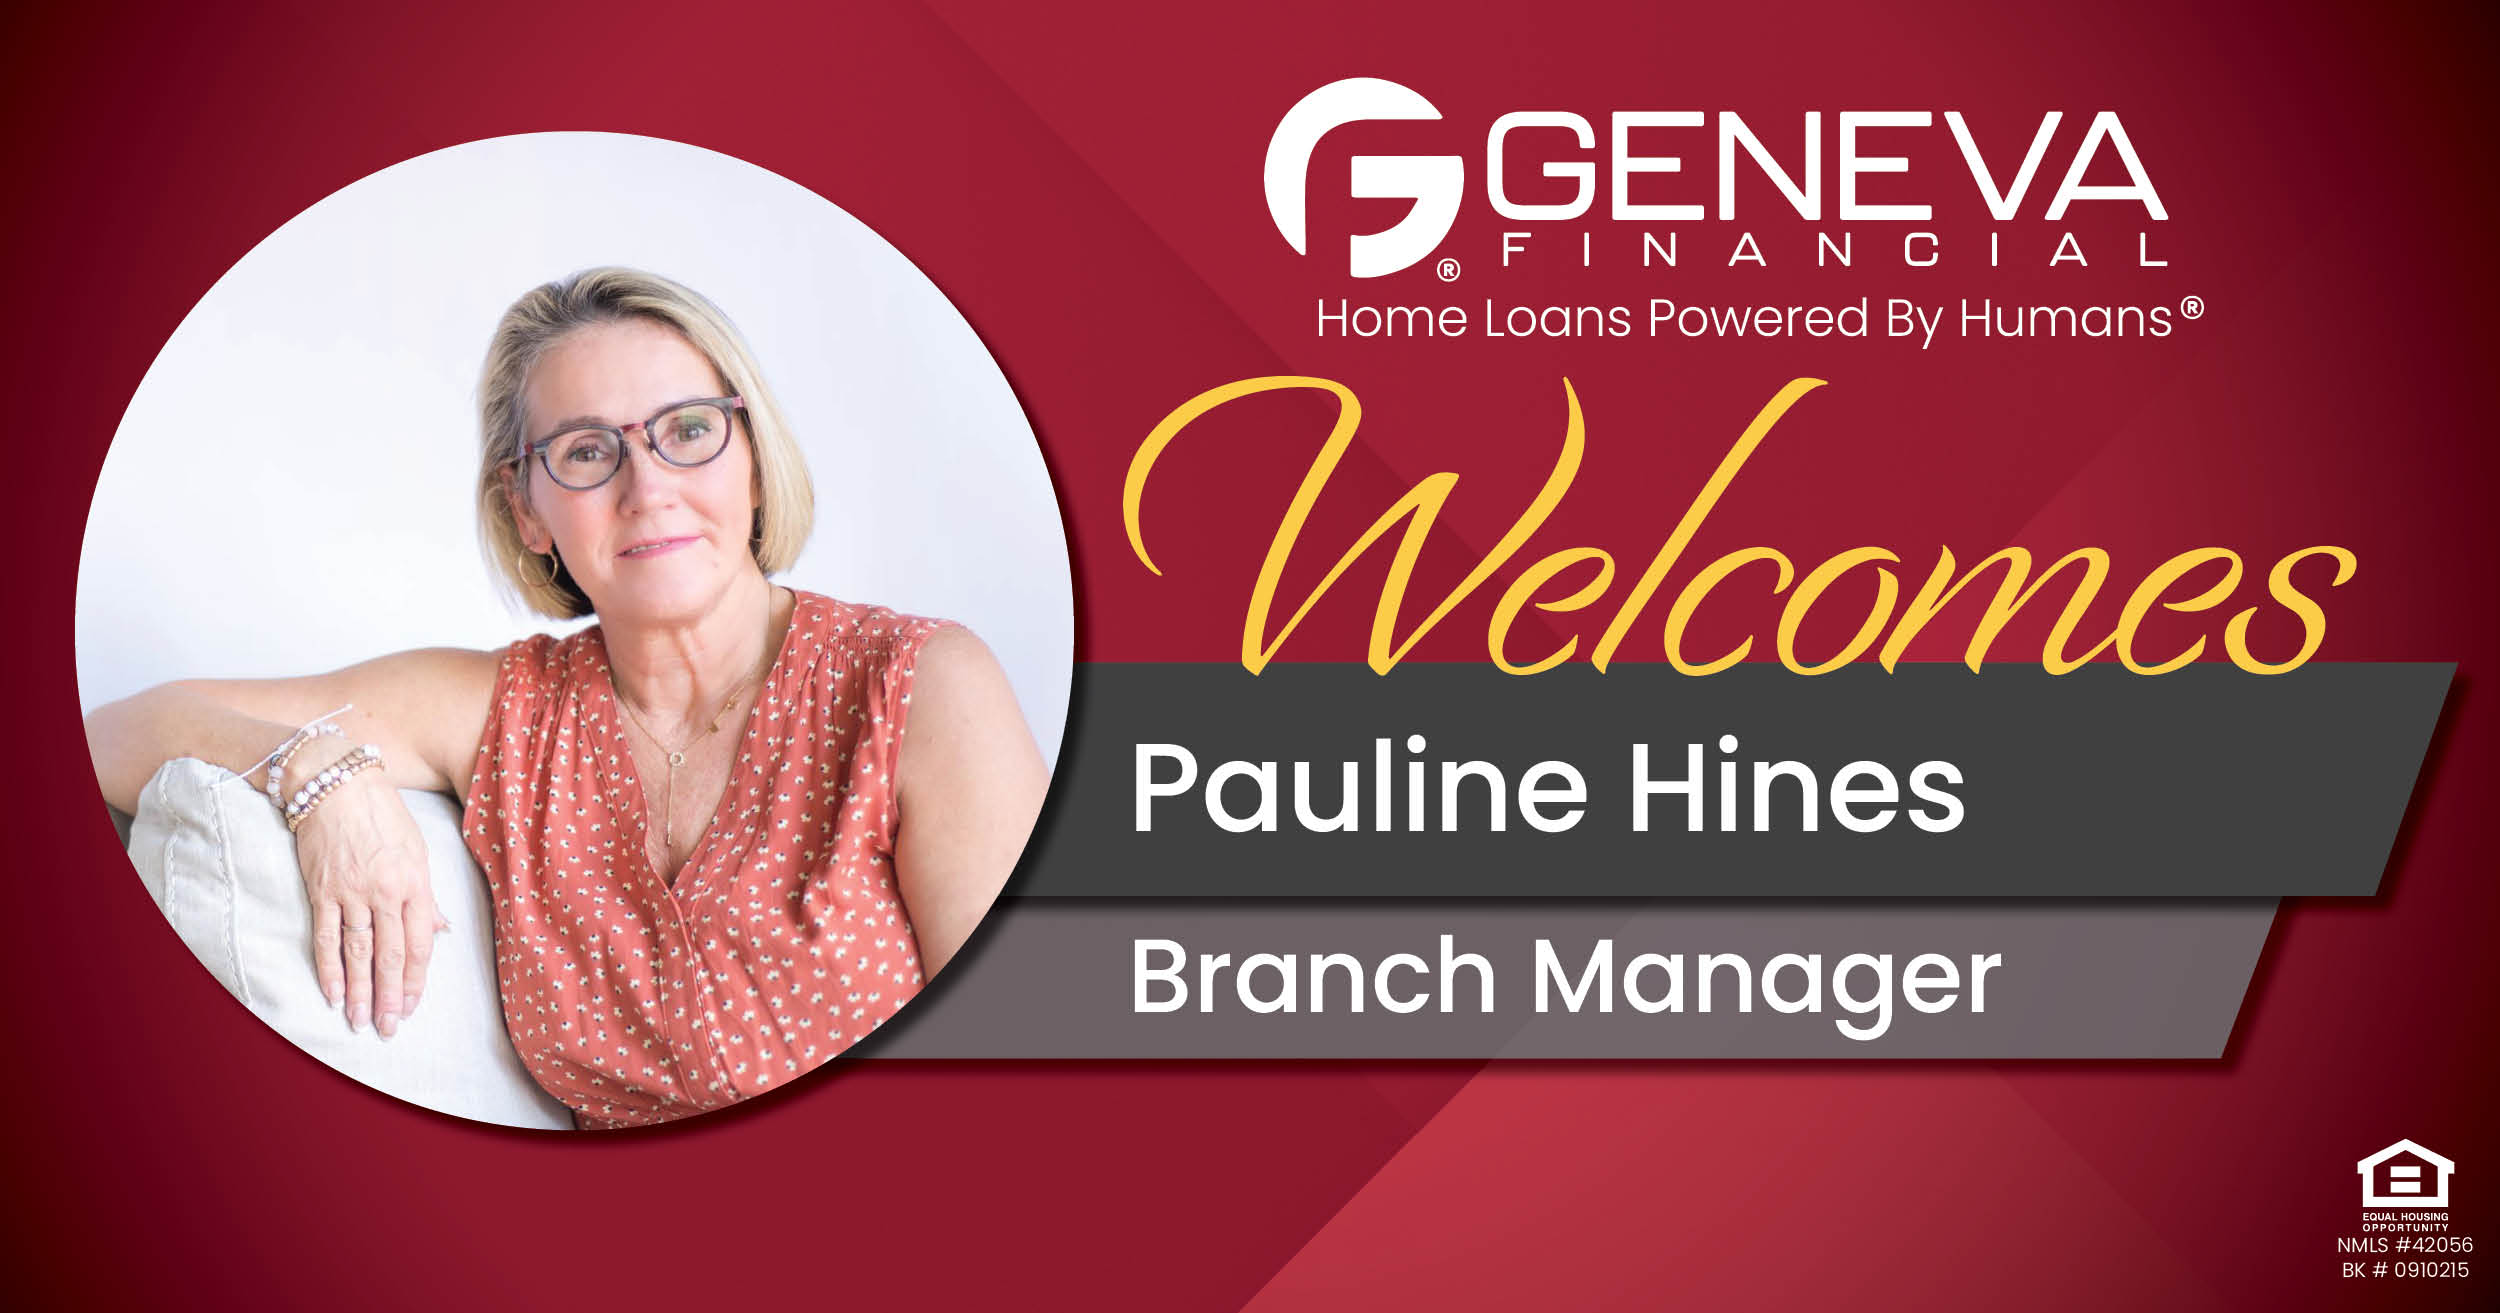 Geneva Financial Welcomes New Branch Manager Pauline Hines to Portland, Oregon – Home Loans Powered by Humans®.